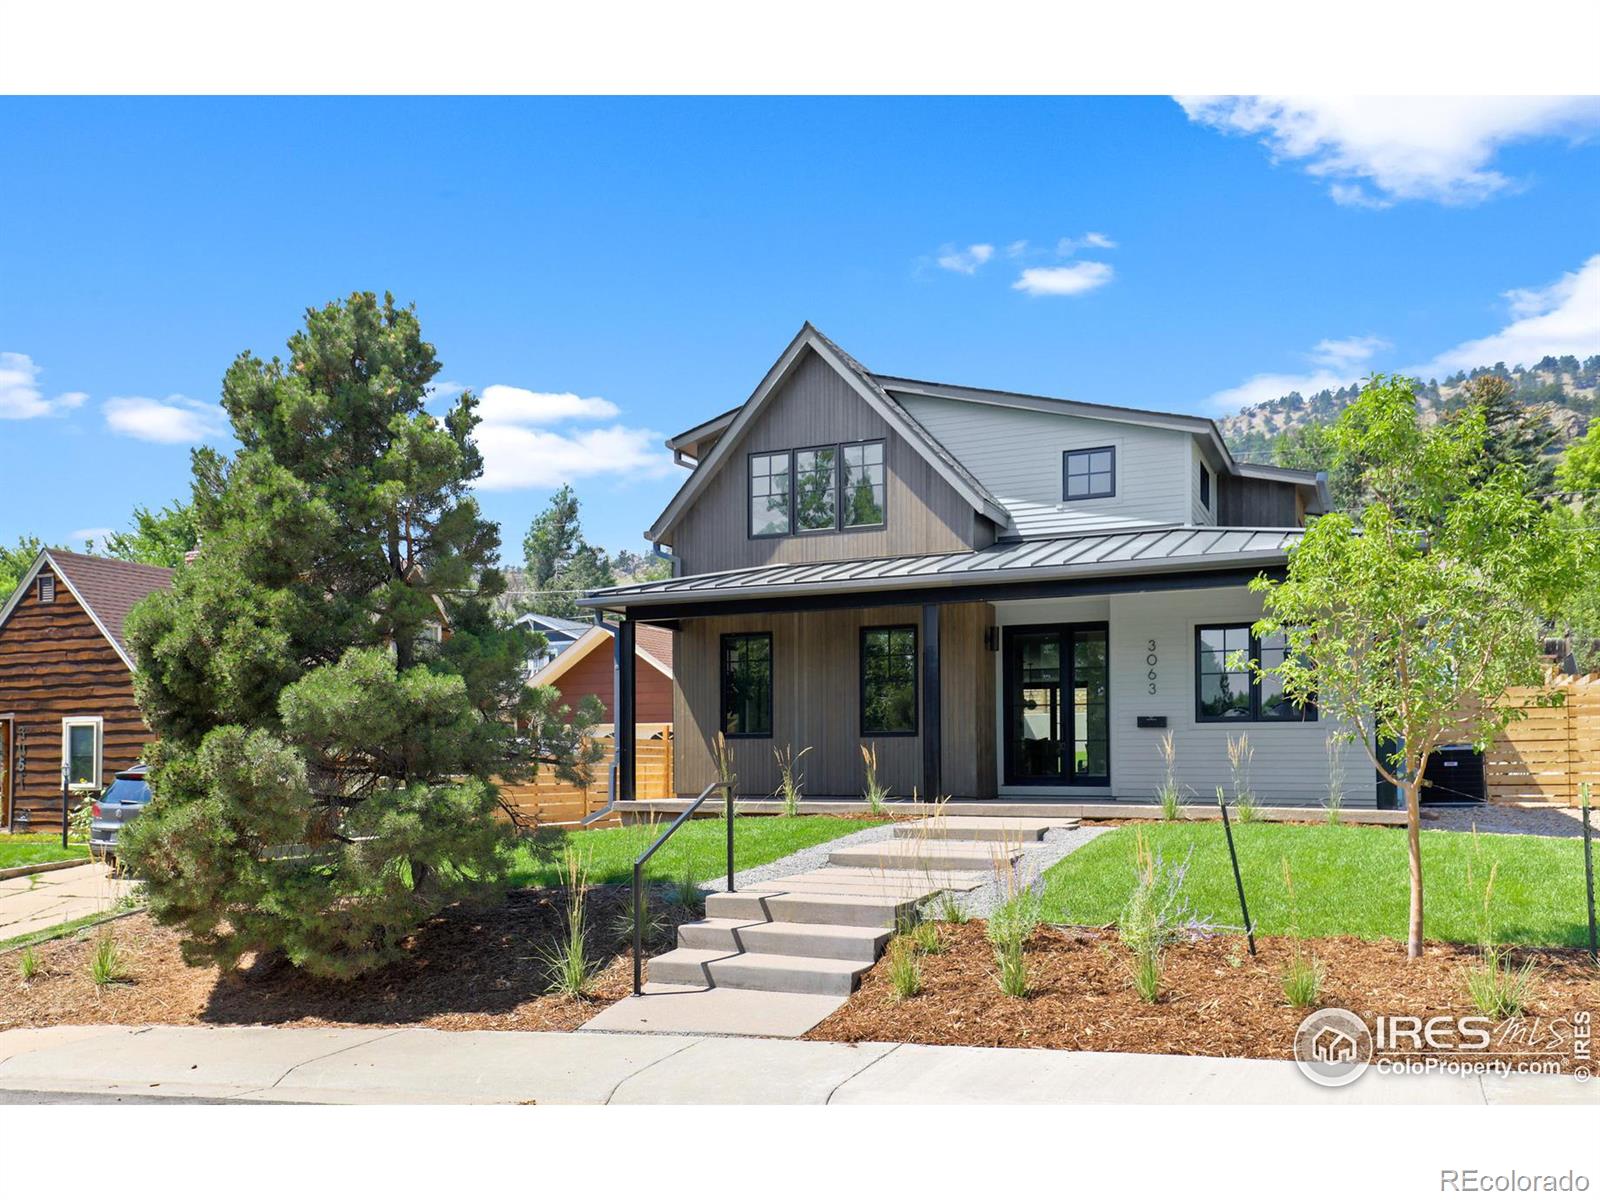 3063  7th street, Boulder sold home. Closed on 2024-05-14 for $3,450,000.